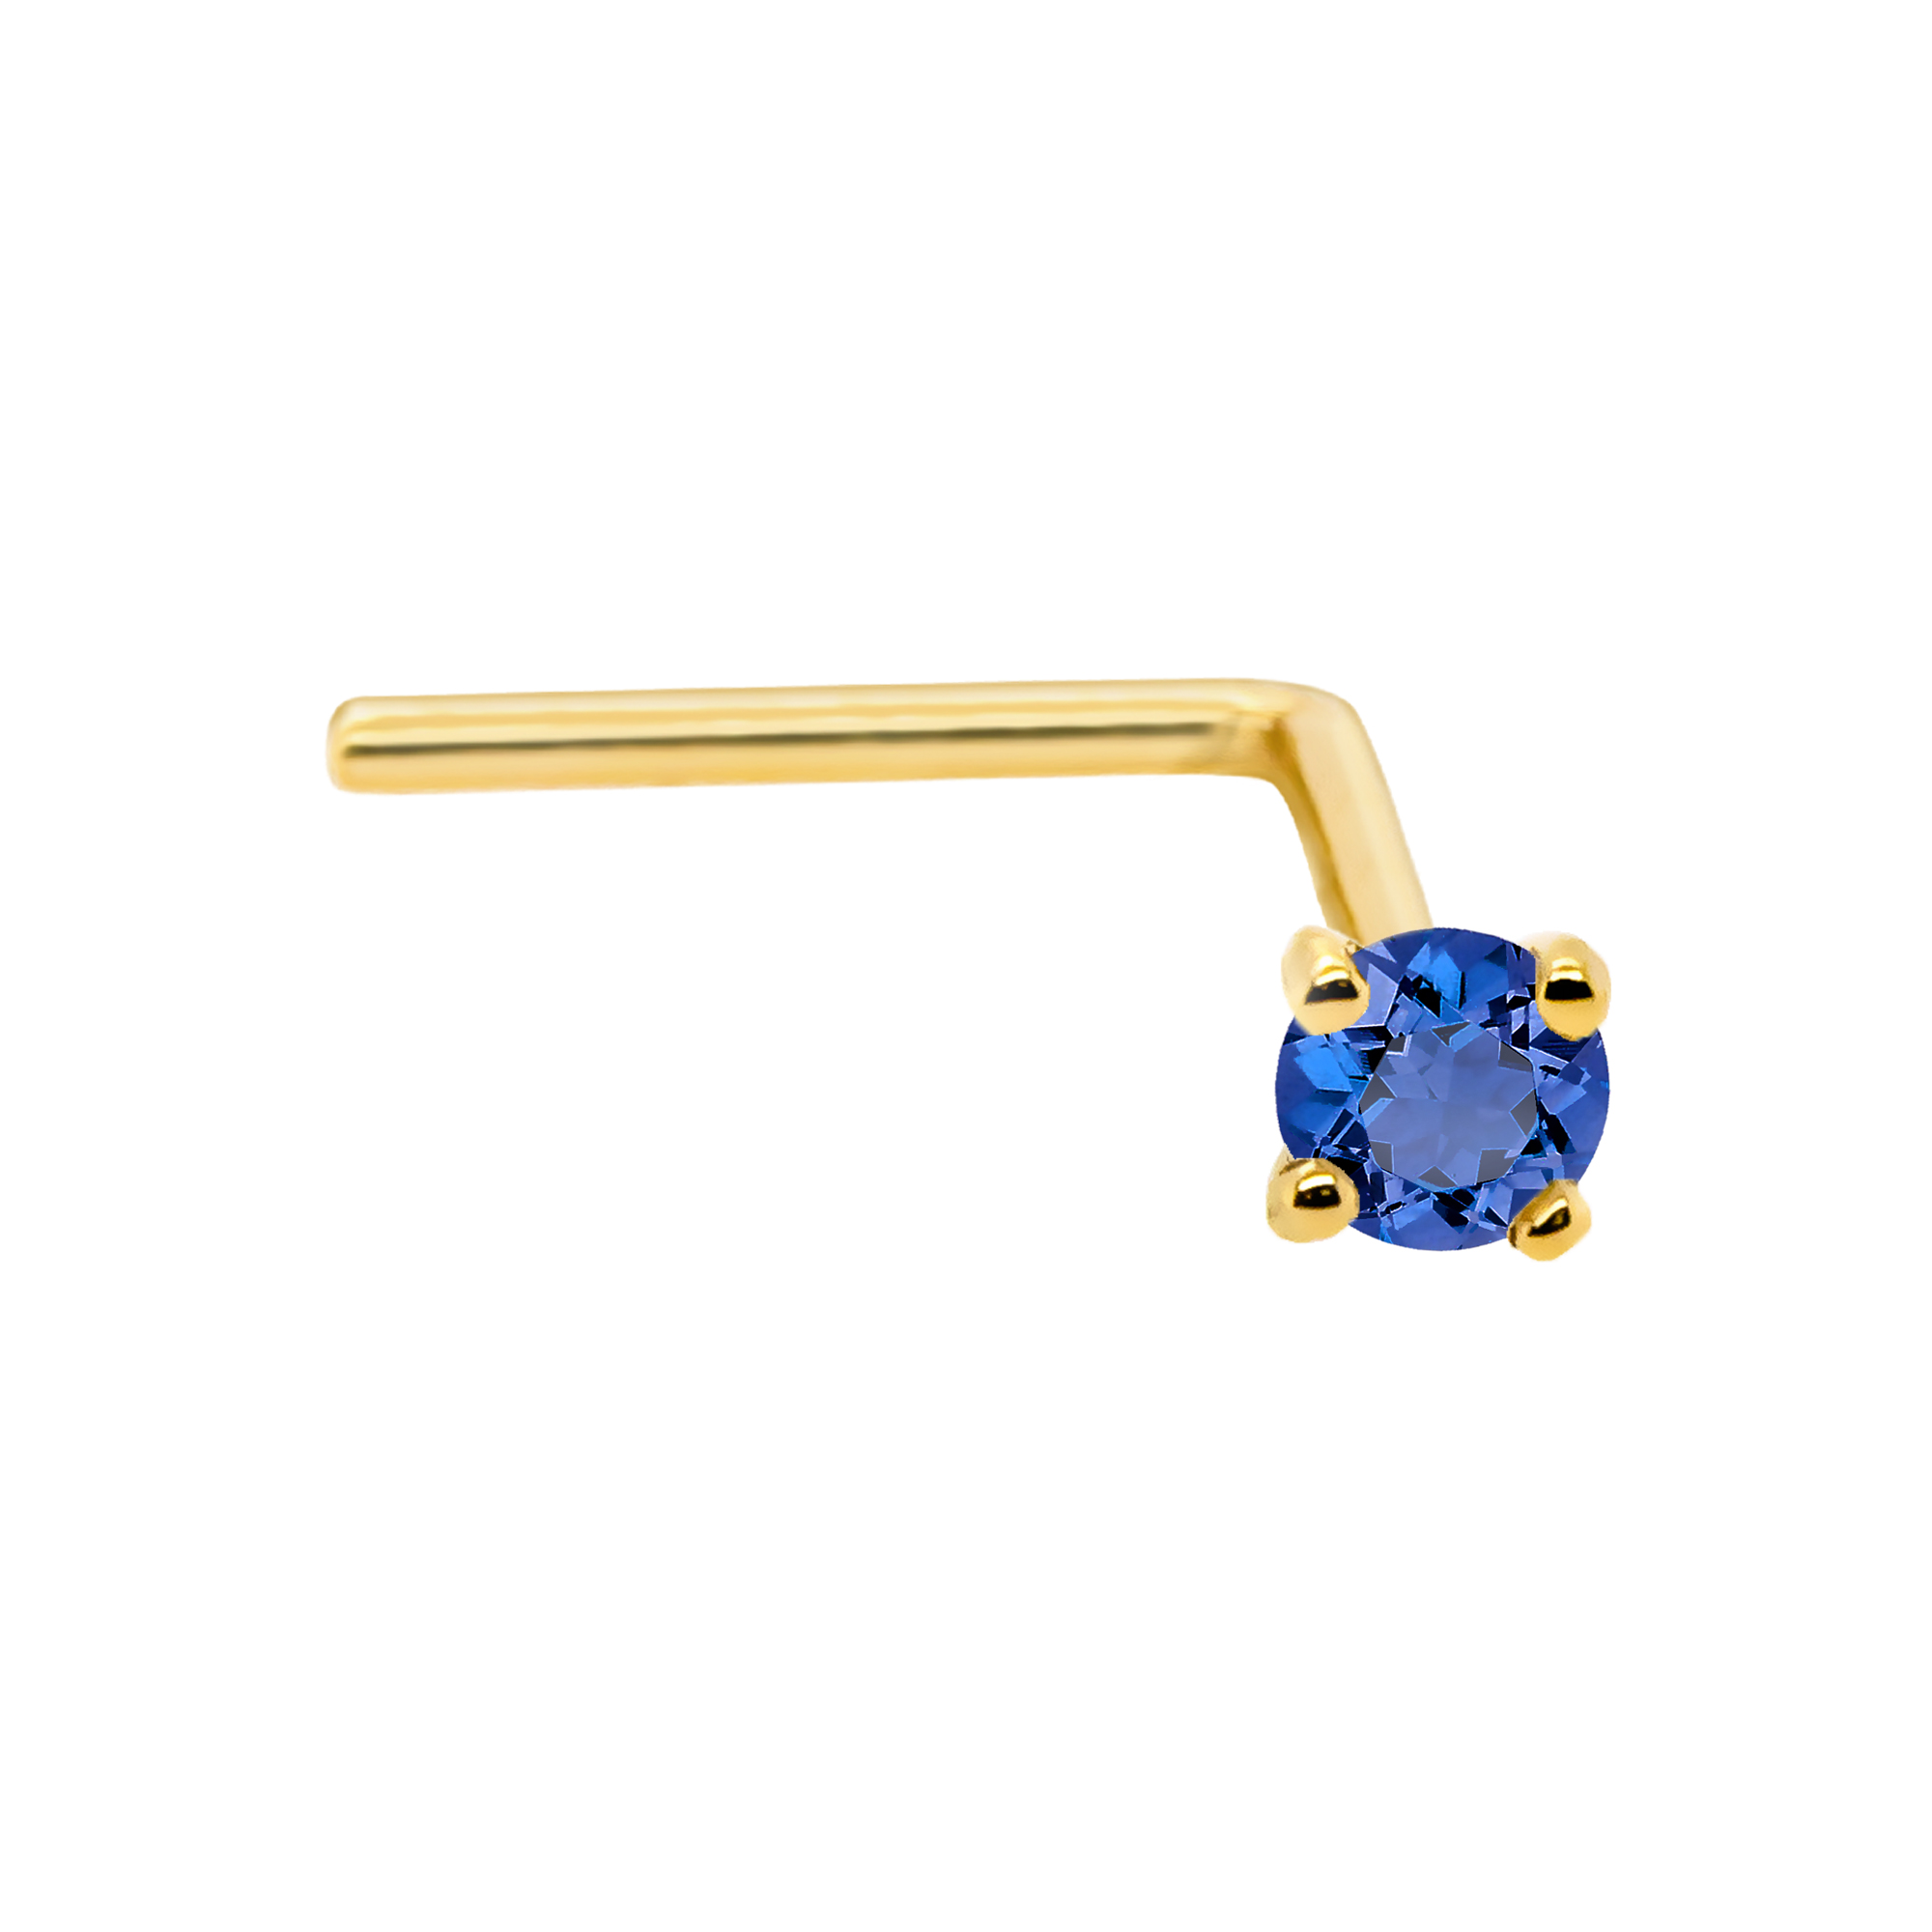 22G Solid 14Kt Gold L-Shape Nose Stud with real  Blue Sapphire Gemstone, 14kt Yellow Gold or 14kt White Gold Prong Setting - September Birthstone Nose Ring